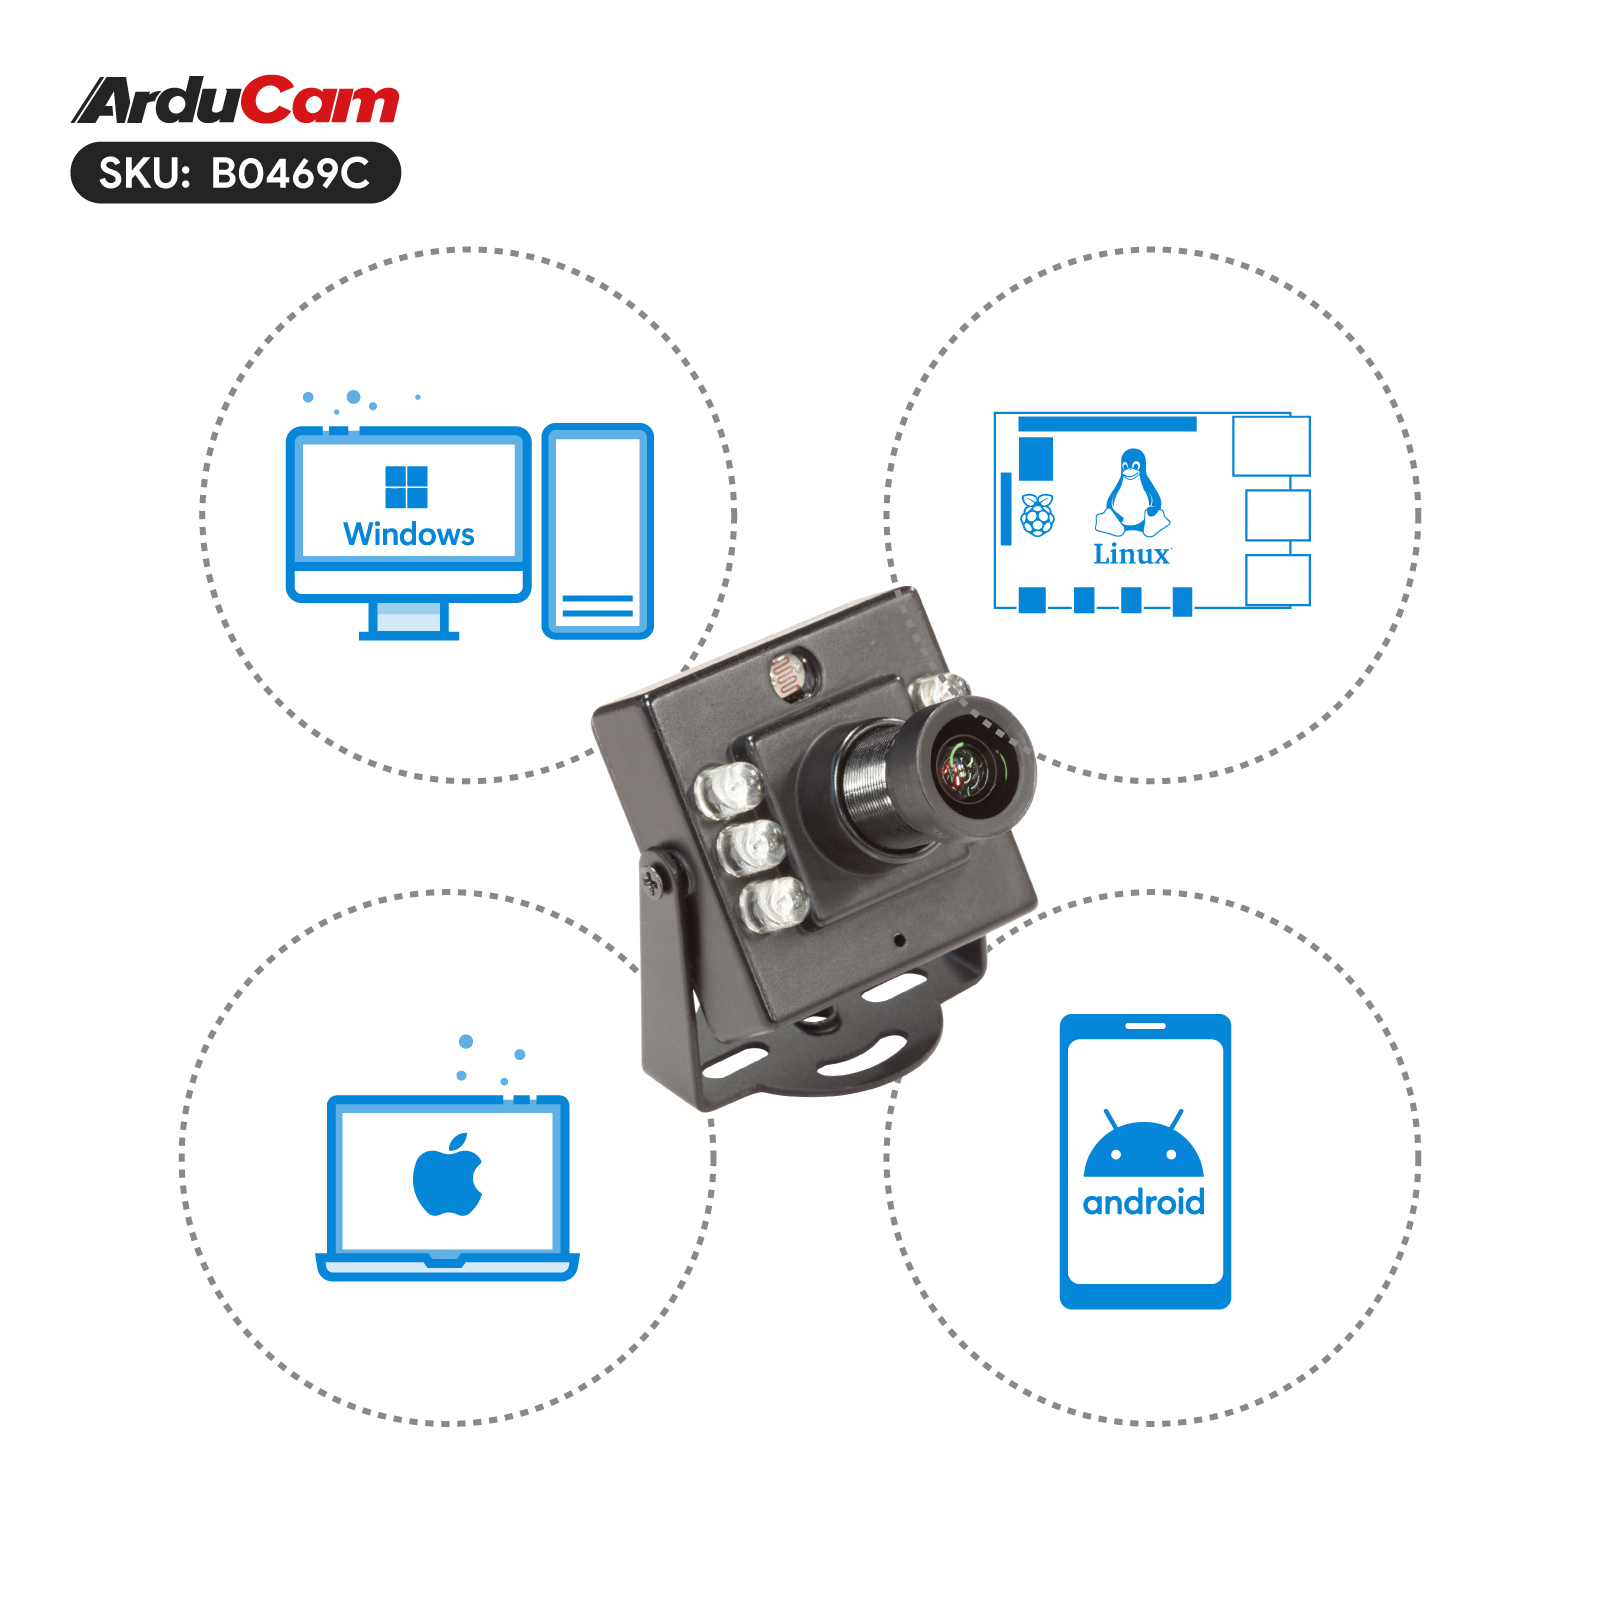  Arducam 1080P Day & Night Vision USB Camera for